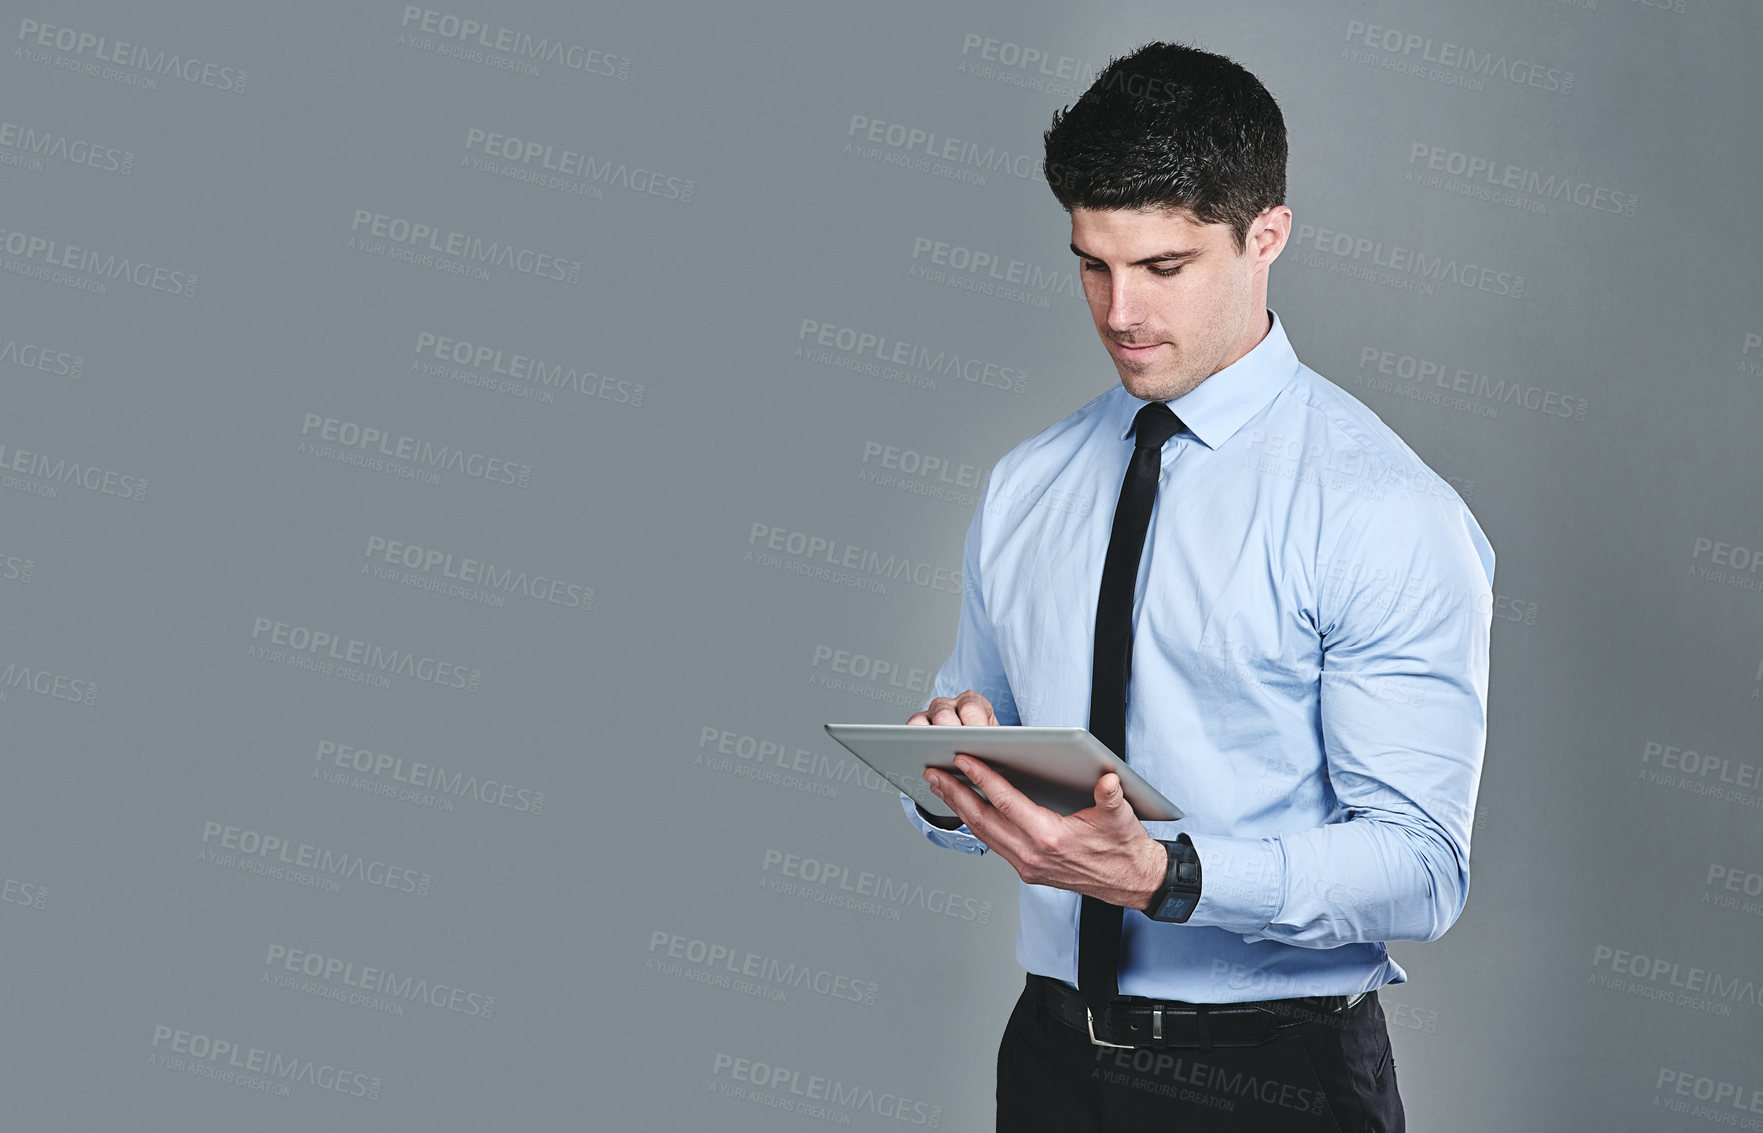 Buy stock photo Studio shot of a young businessman using a digital tablet against a grey background